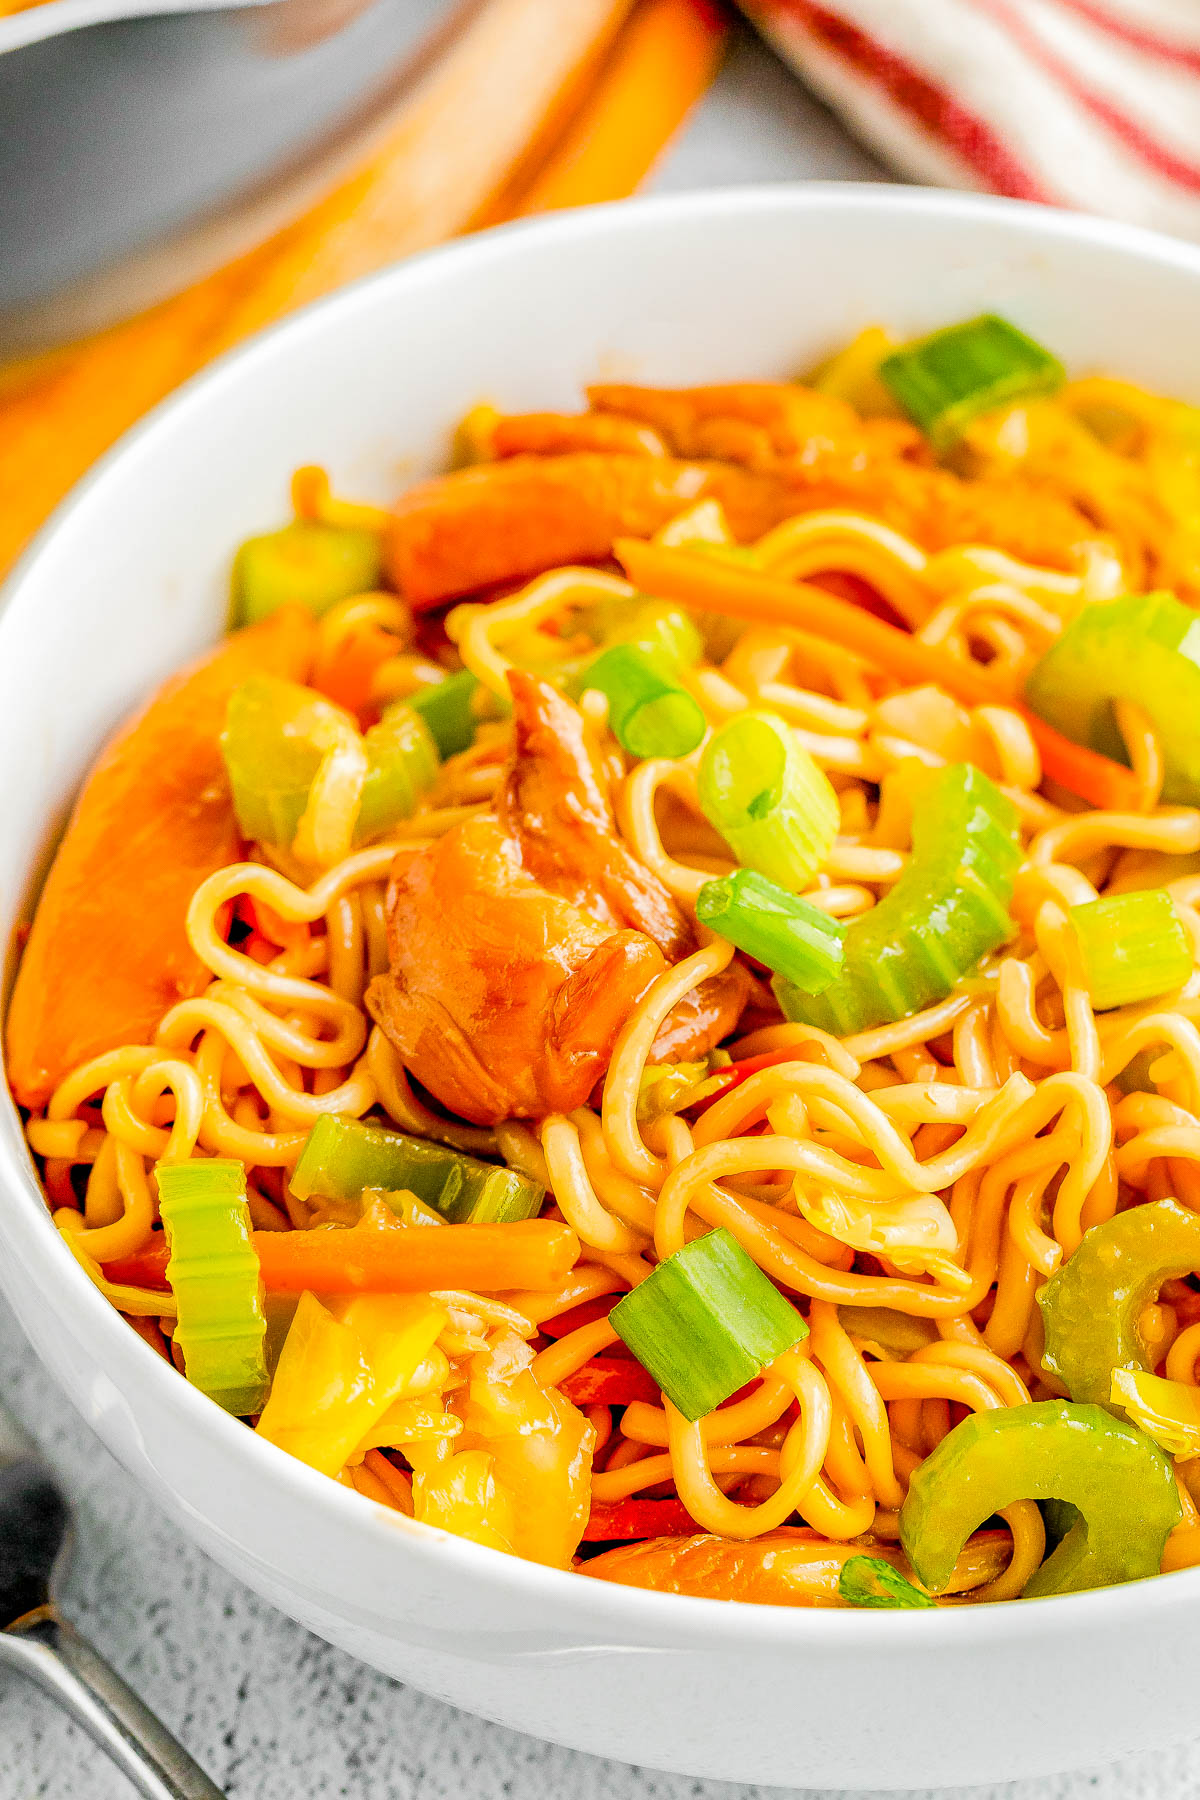 Chicken Chow Mein — Chewy chow mein noodles, crisp-tender veggies, and juicy chicken are stir-fried in a sesame-soy sauce! It’s a SIMPLE and FAST recipe that anyone can make. It's cheaper than ordering take out, your family will be impressed, and you'll love how EASY it is to prepare!